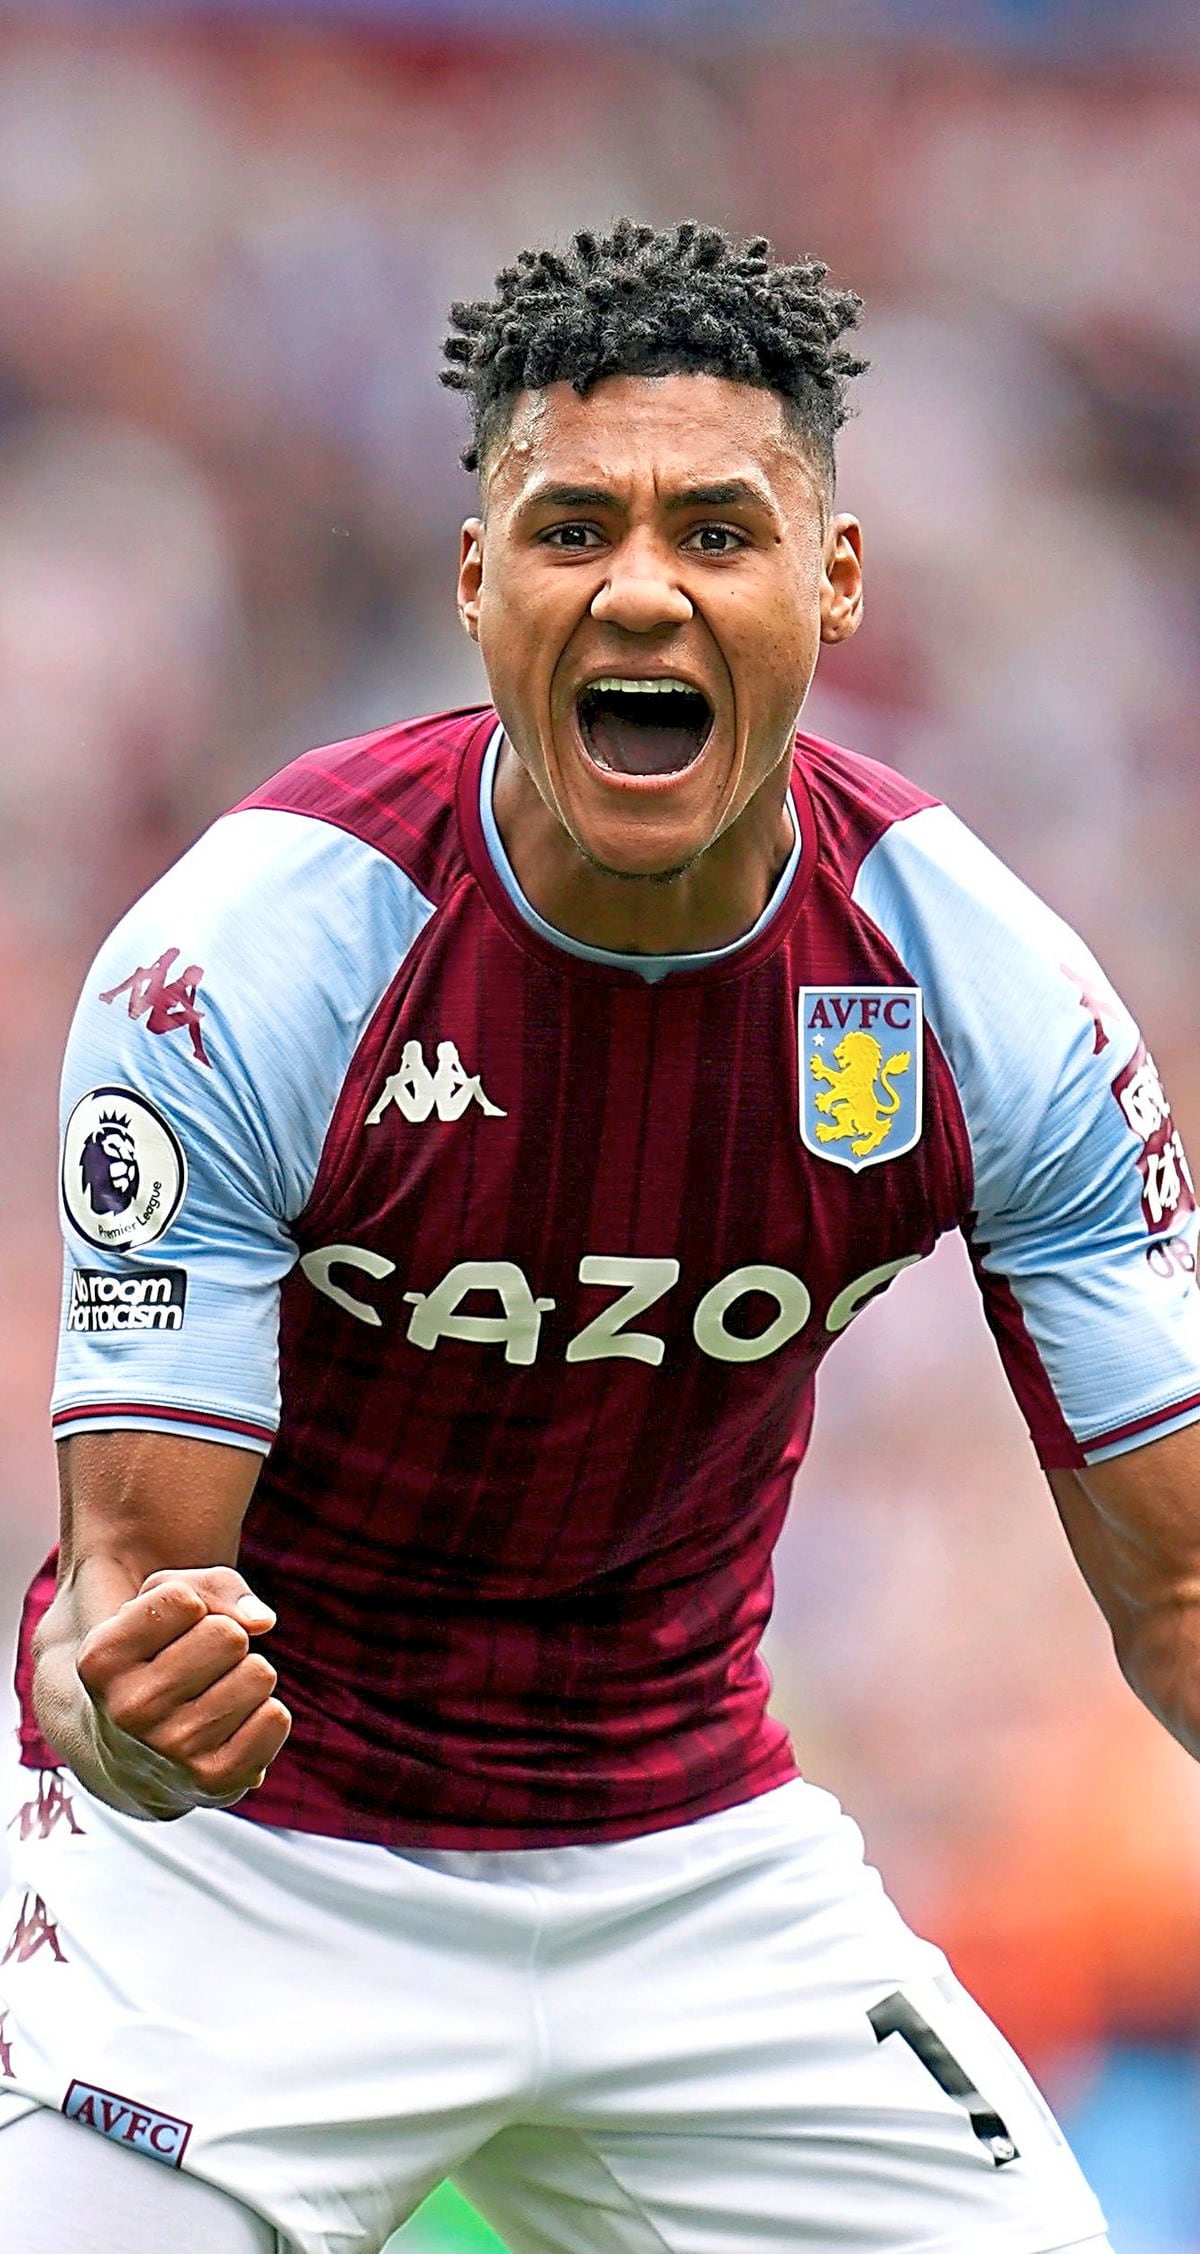 
              
Aston Villa's Ollie Watkins celebrates scoring their side's first goal of the game during the Premier League match at Villa Park, Birmingham. Picture date: Saturday April 30, 2022. PA Photo. See PA story SOCCER Villa. Photo credit should read: Nick Potts/PA Wire.


RESTRICTIONS: EDITORIAL USE ONLY 
No use with unauthorised audio, video, data, fixture lists, club/league logos or "live" services. Online in-match use limited to 120 images, no video emulation. No use in betting, games or single club/league/player publications.
            
